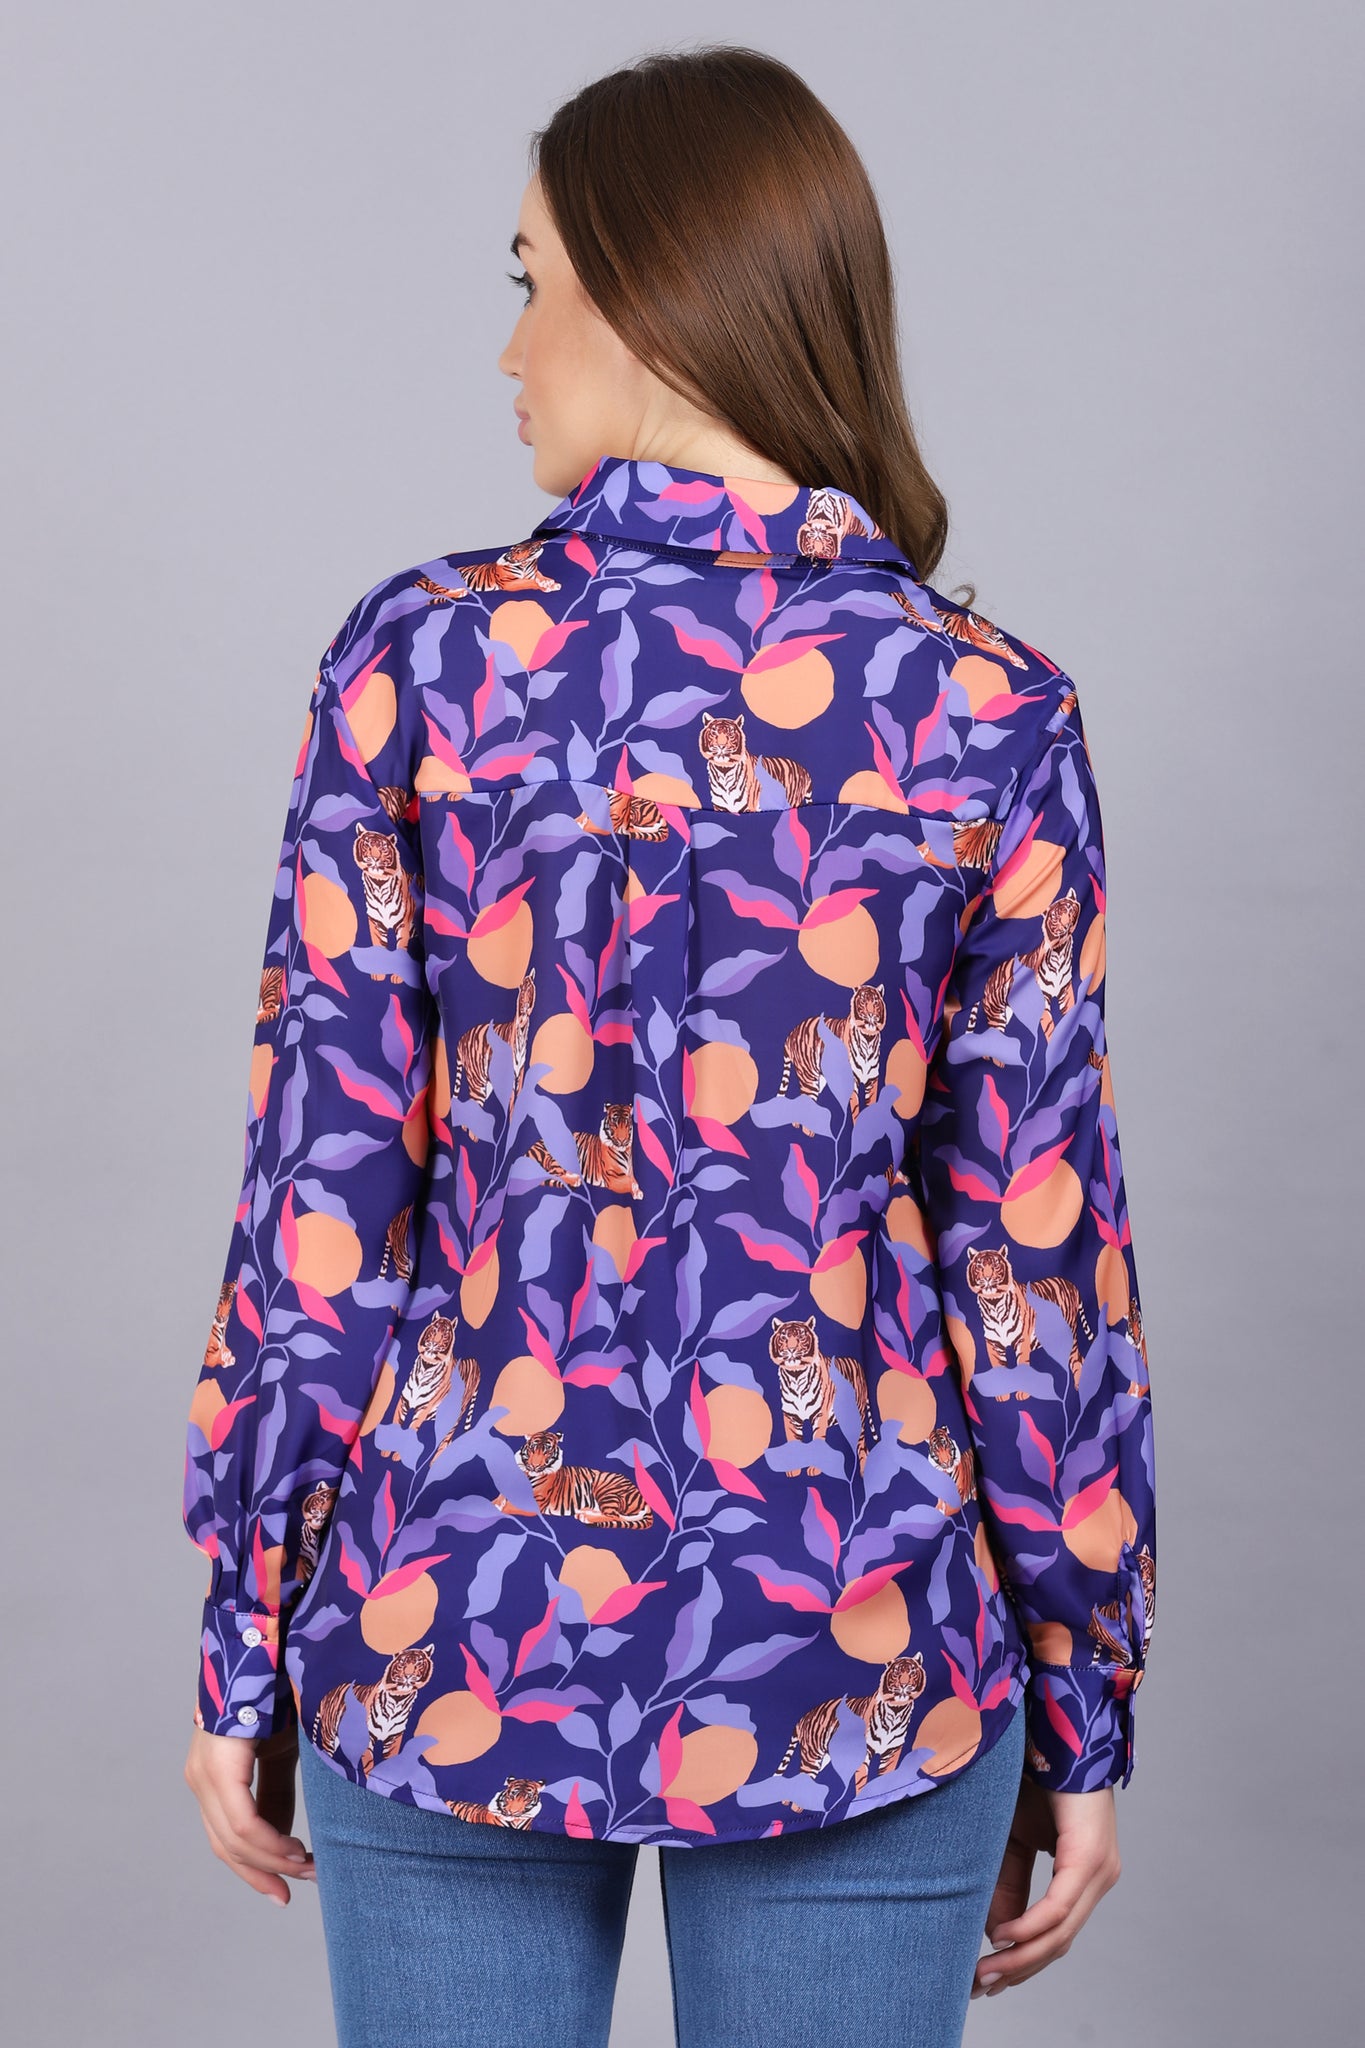 Exclusive Tiger Printed Shirt For Women